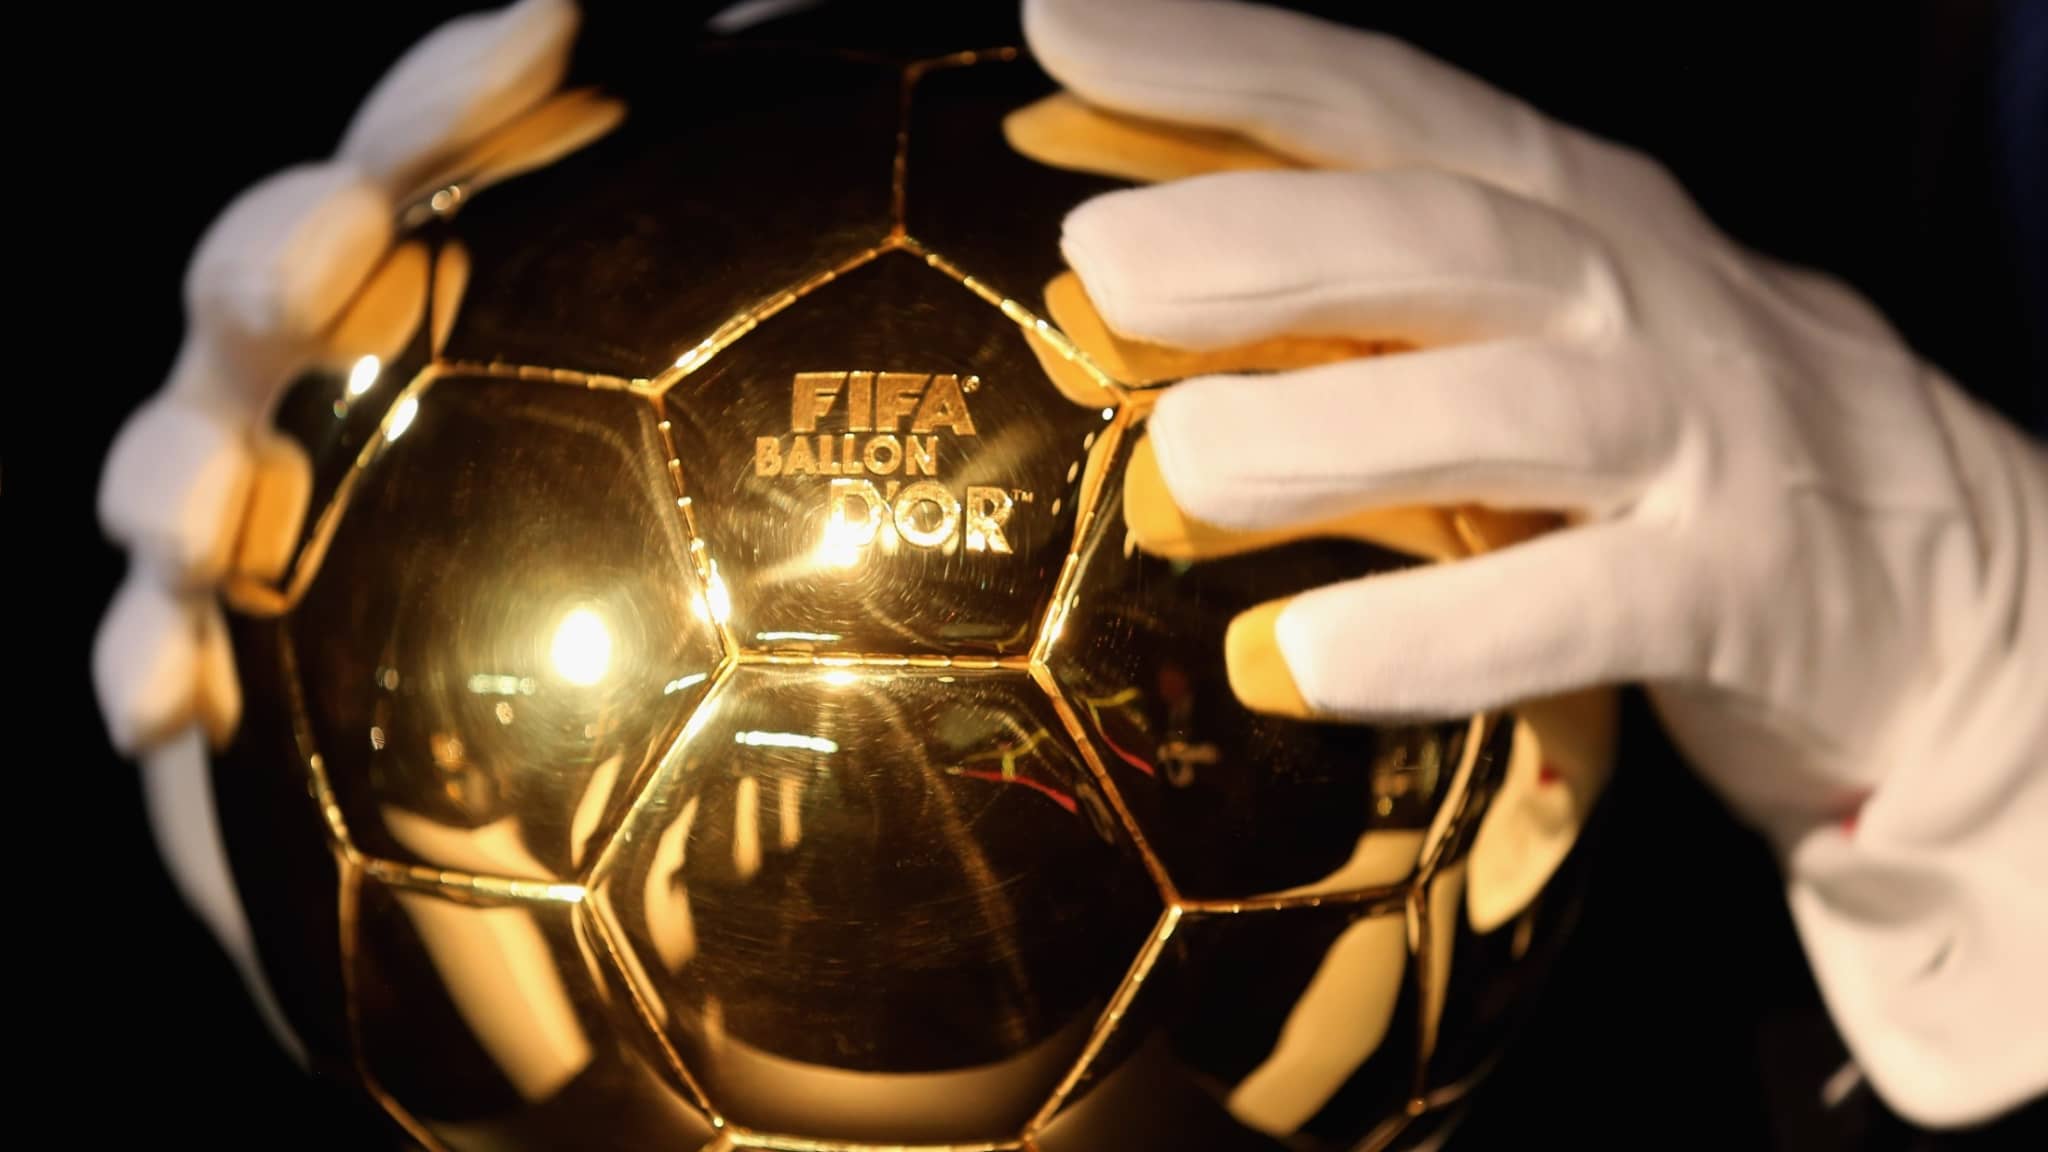 Welcome to FIFA.com News facts about the FIFA Ballon d'Or